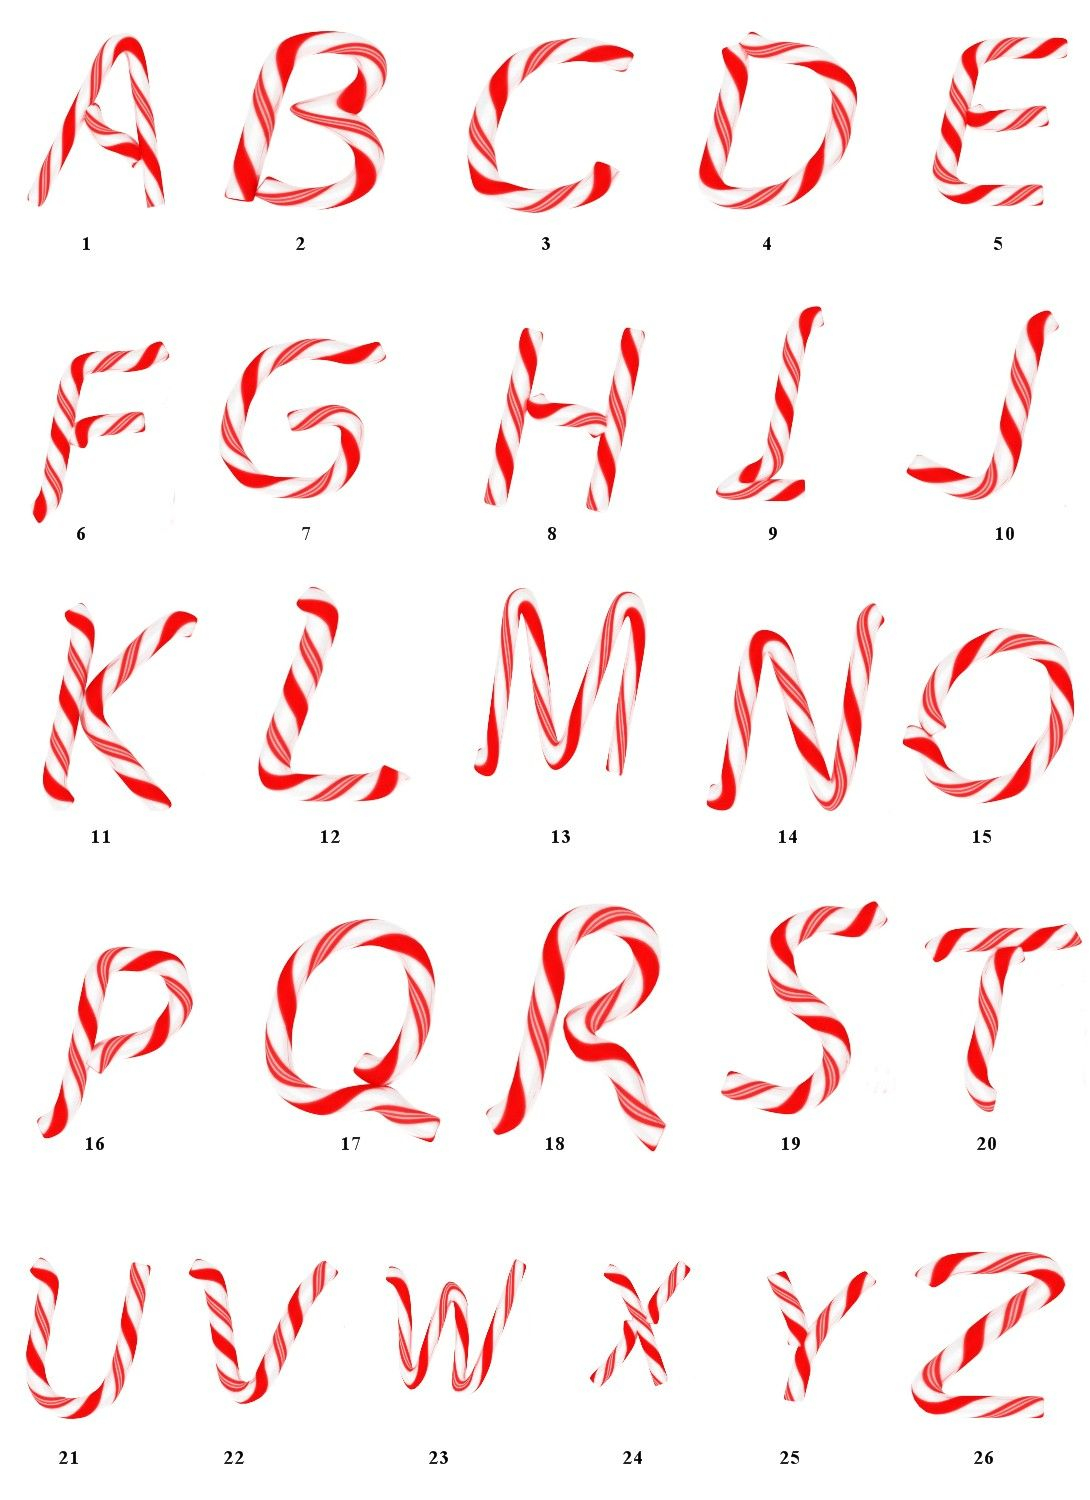 Free Candy Cane Letters Printables | Candyland | Pinterest | Candy - Free Printable Candy Cane